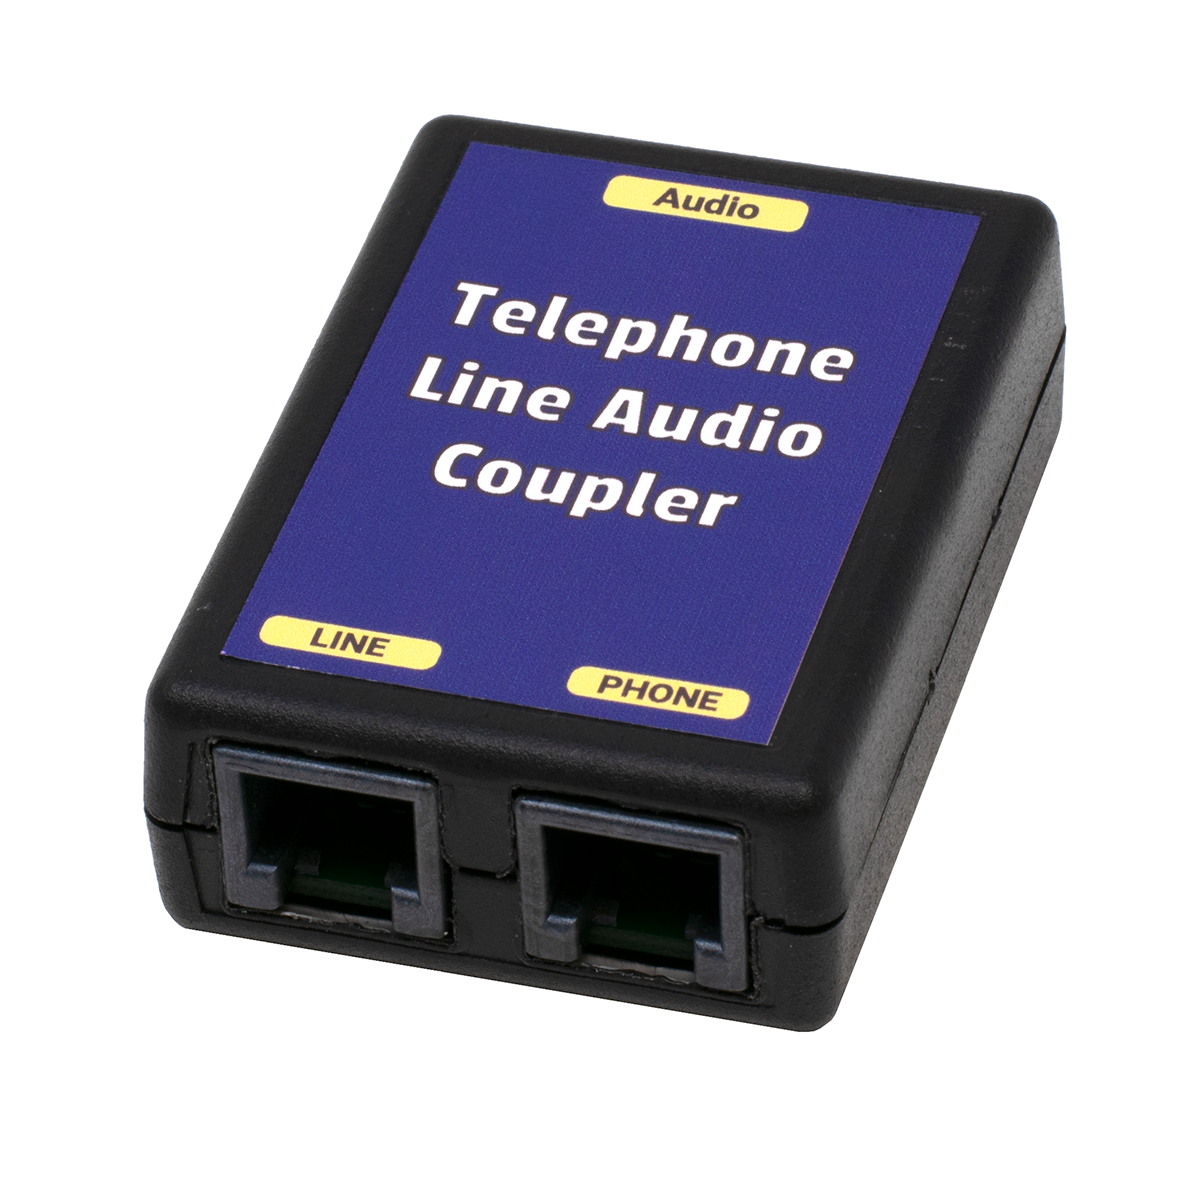 Phone Line Audio Coupler (Side View)